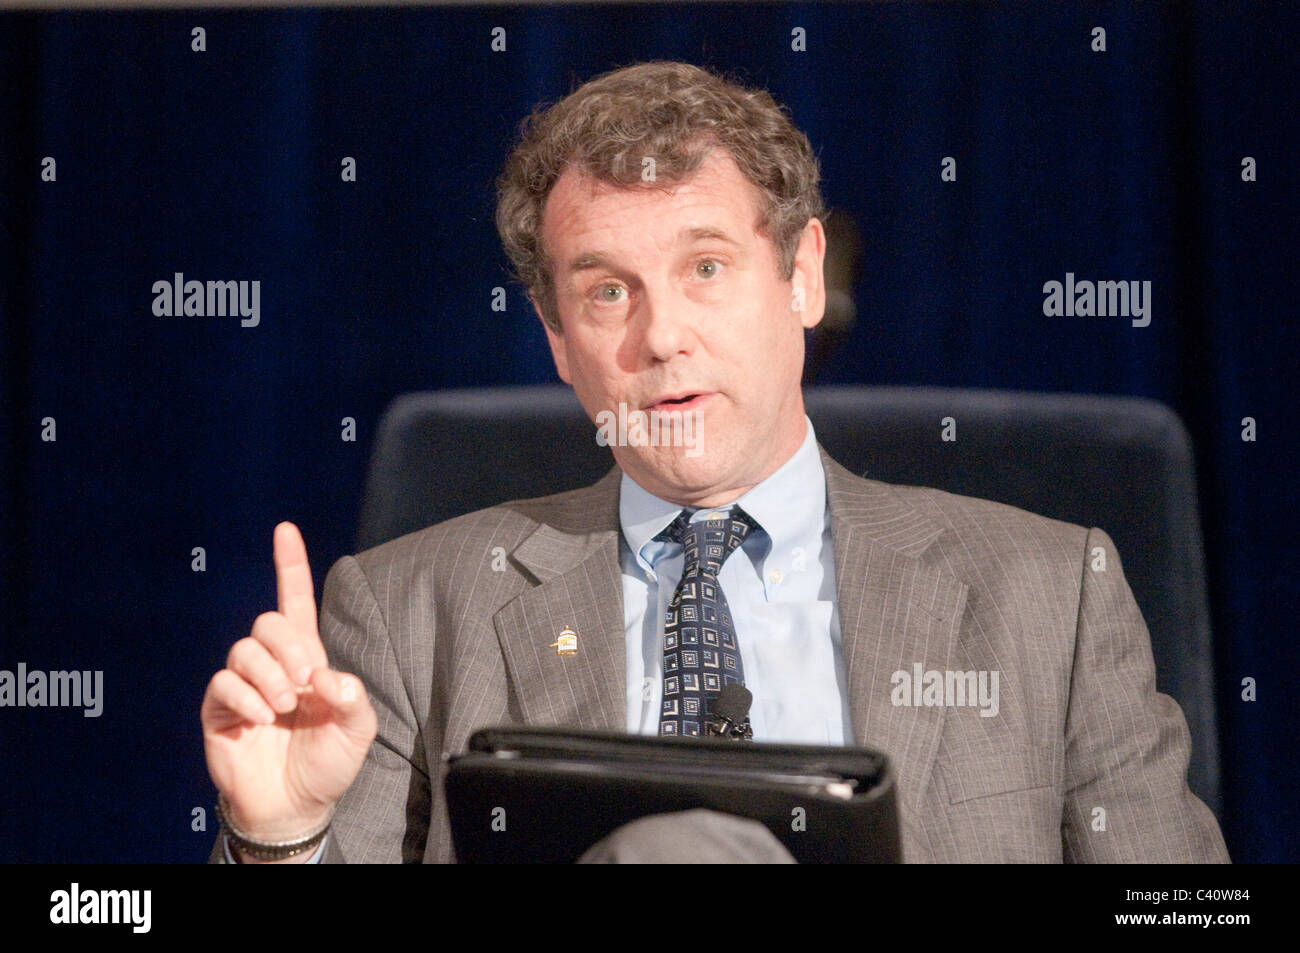 Sen. Sherrod Brown (D-OH) speaks at the Hamilton project 2010 Kick-Off event. Stock Photo